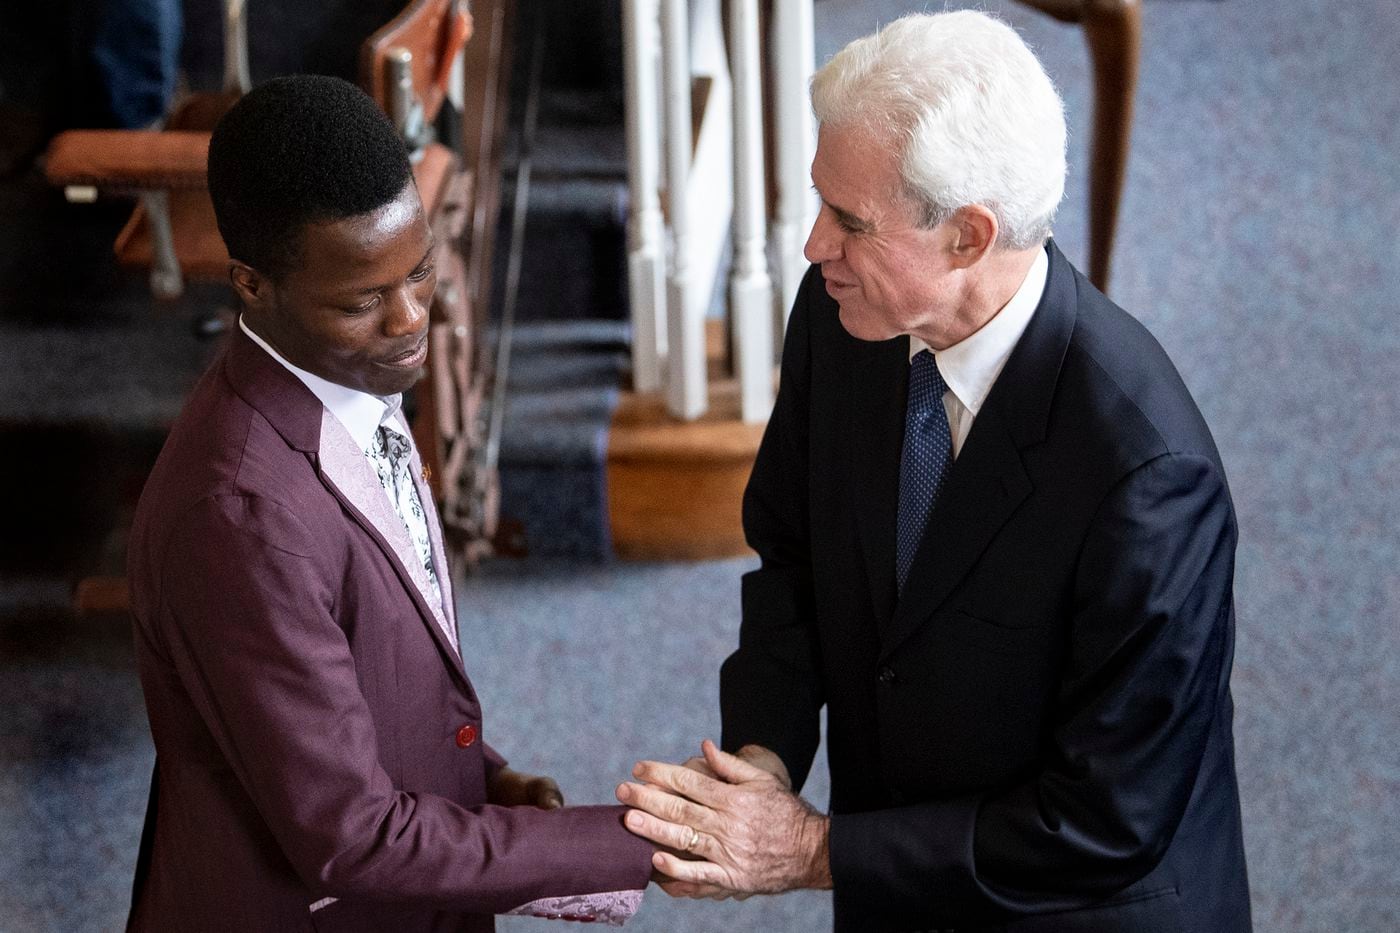 Pastor Cliff Jones, right, greets Marcel Njighe, who’s originally from Cameroon, at St. Paul’s Presbyterian Church in Laurel Springs. The congregation prays for Cameroon, which some observers describe as on the verge of civil war. Jones said the people in his flock also want to learn more about the situation, and to do more to help.